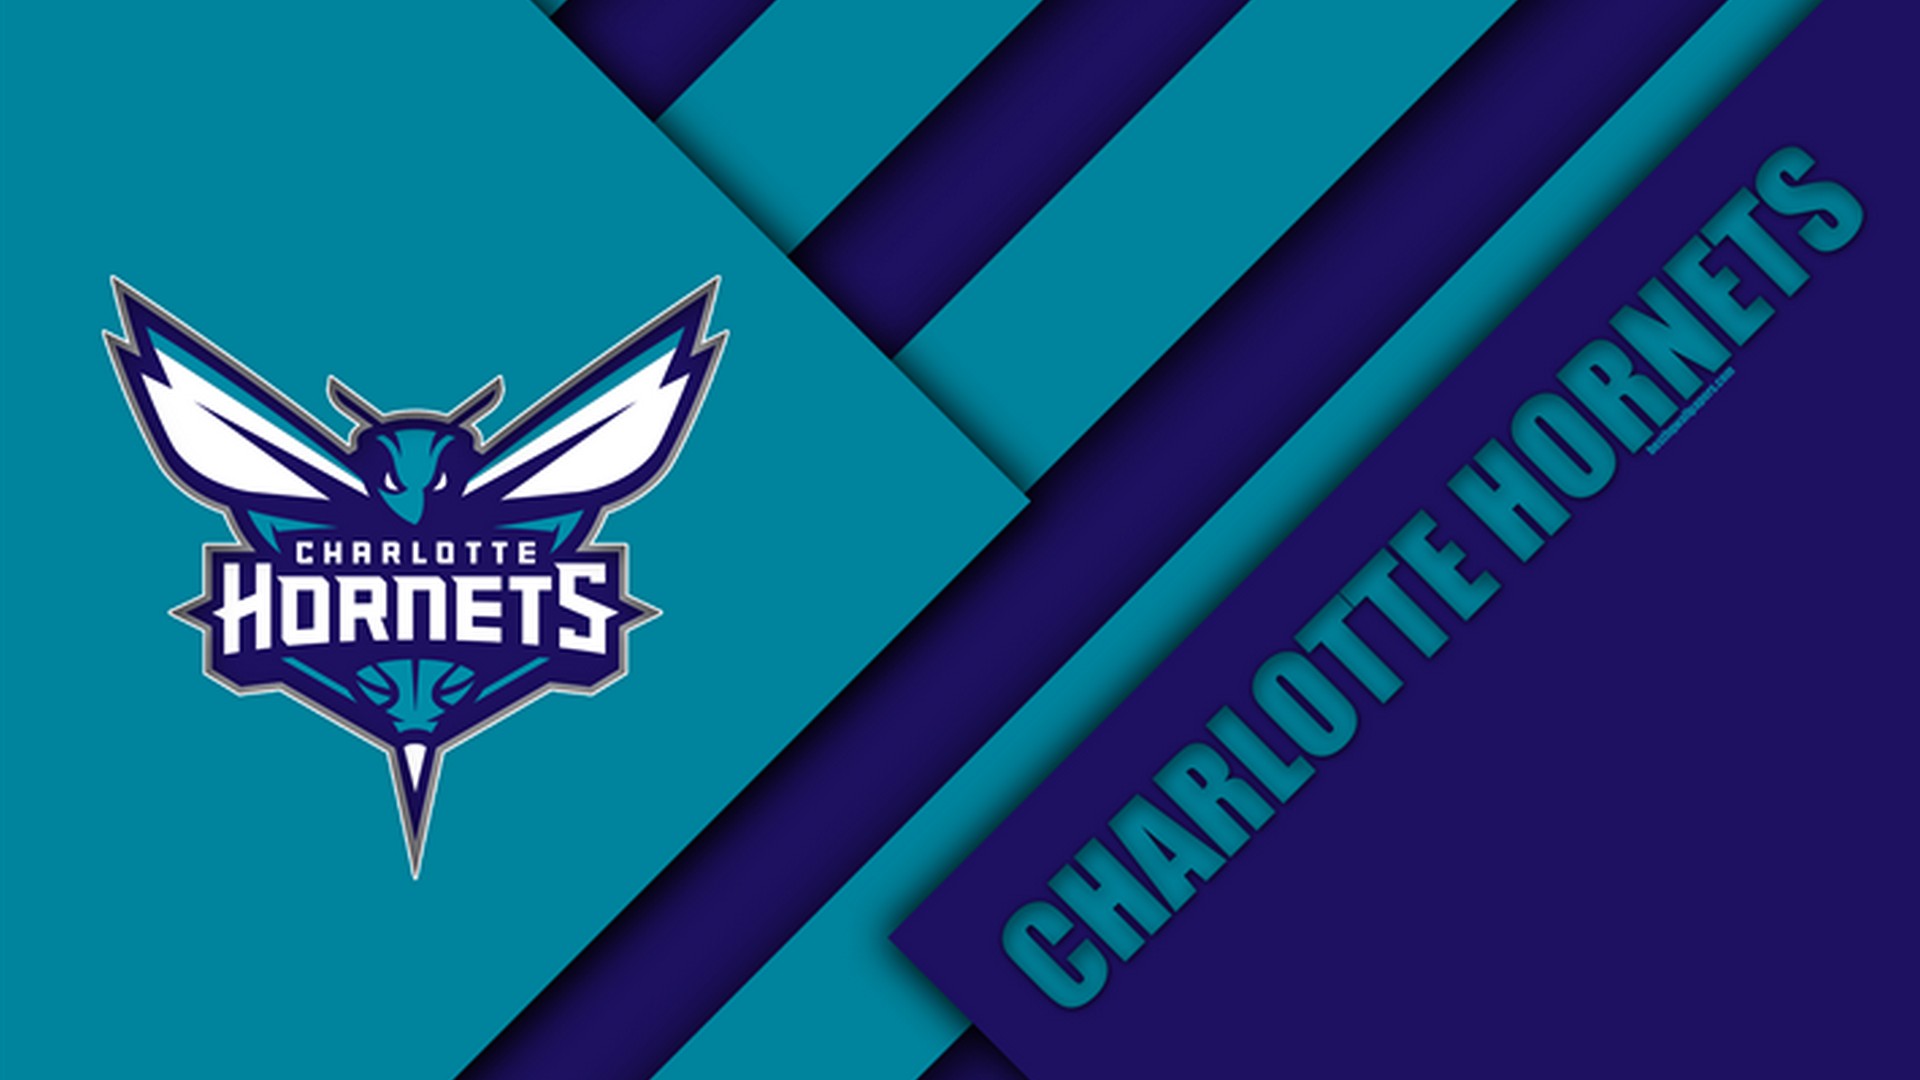 Wallpapers Charlotte Hornets With High-resolution Pixel - Charlotte Hornets City Background - HD Wallpaper 